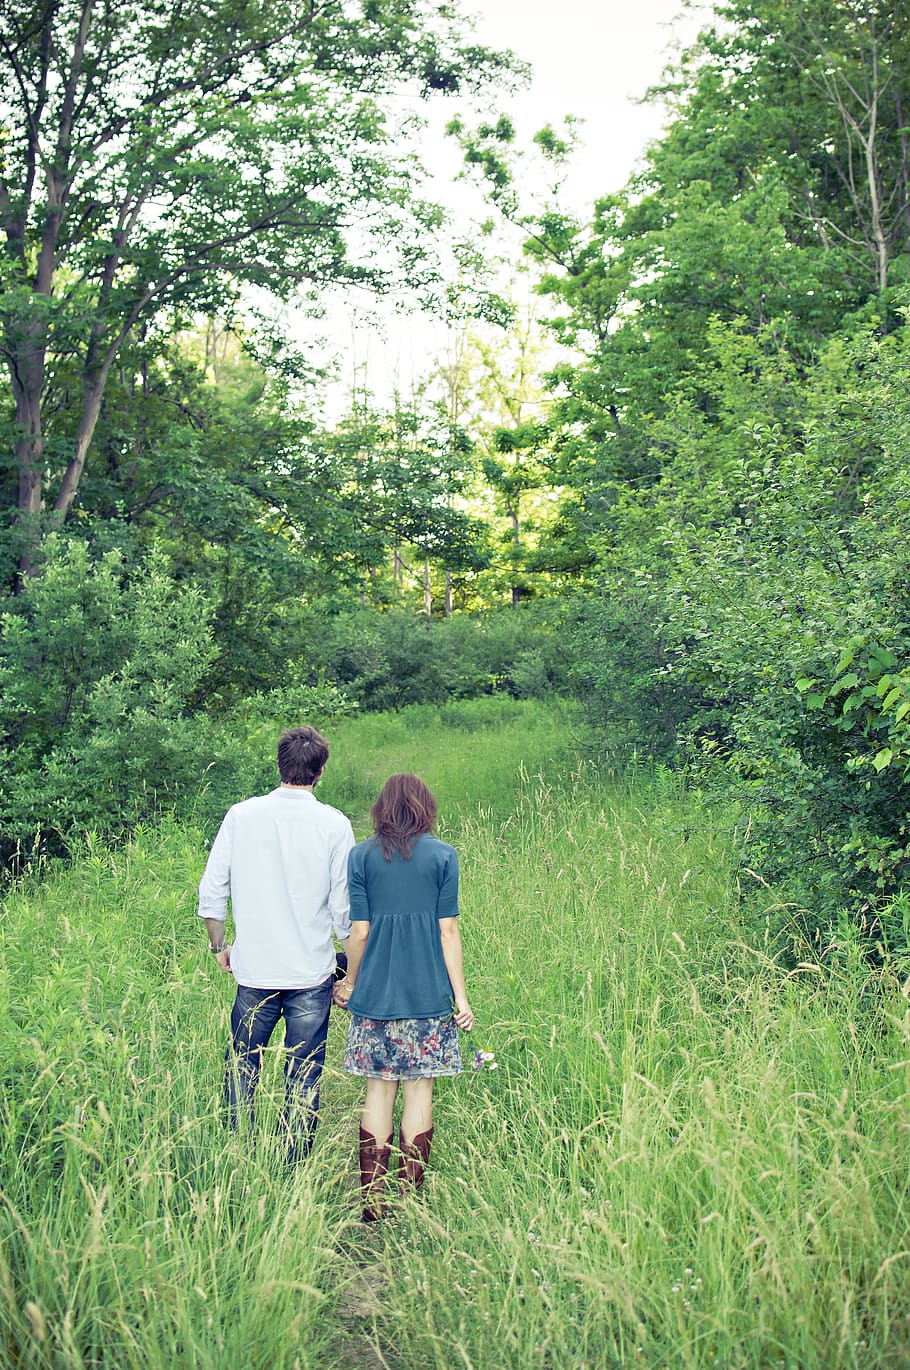 canada, london, forest, tree, woman, couple, field, plant, two people